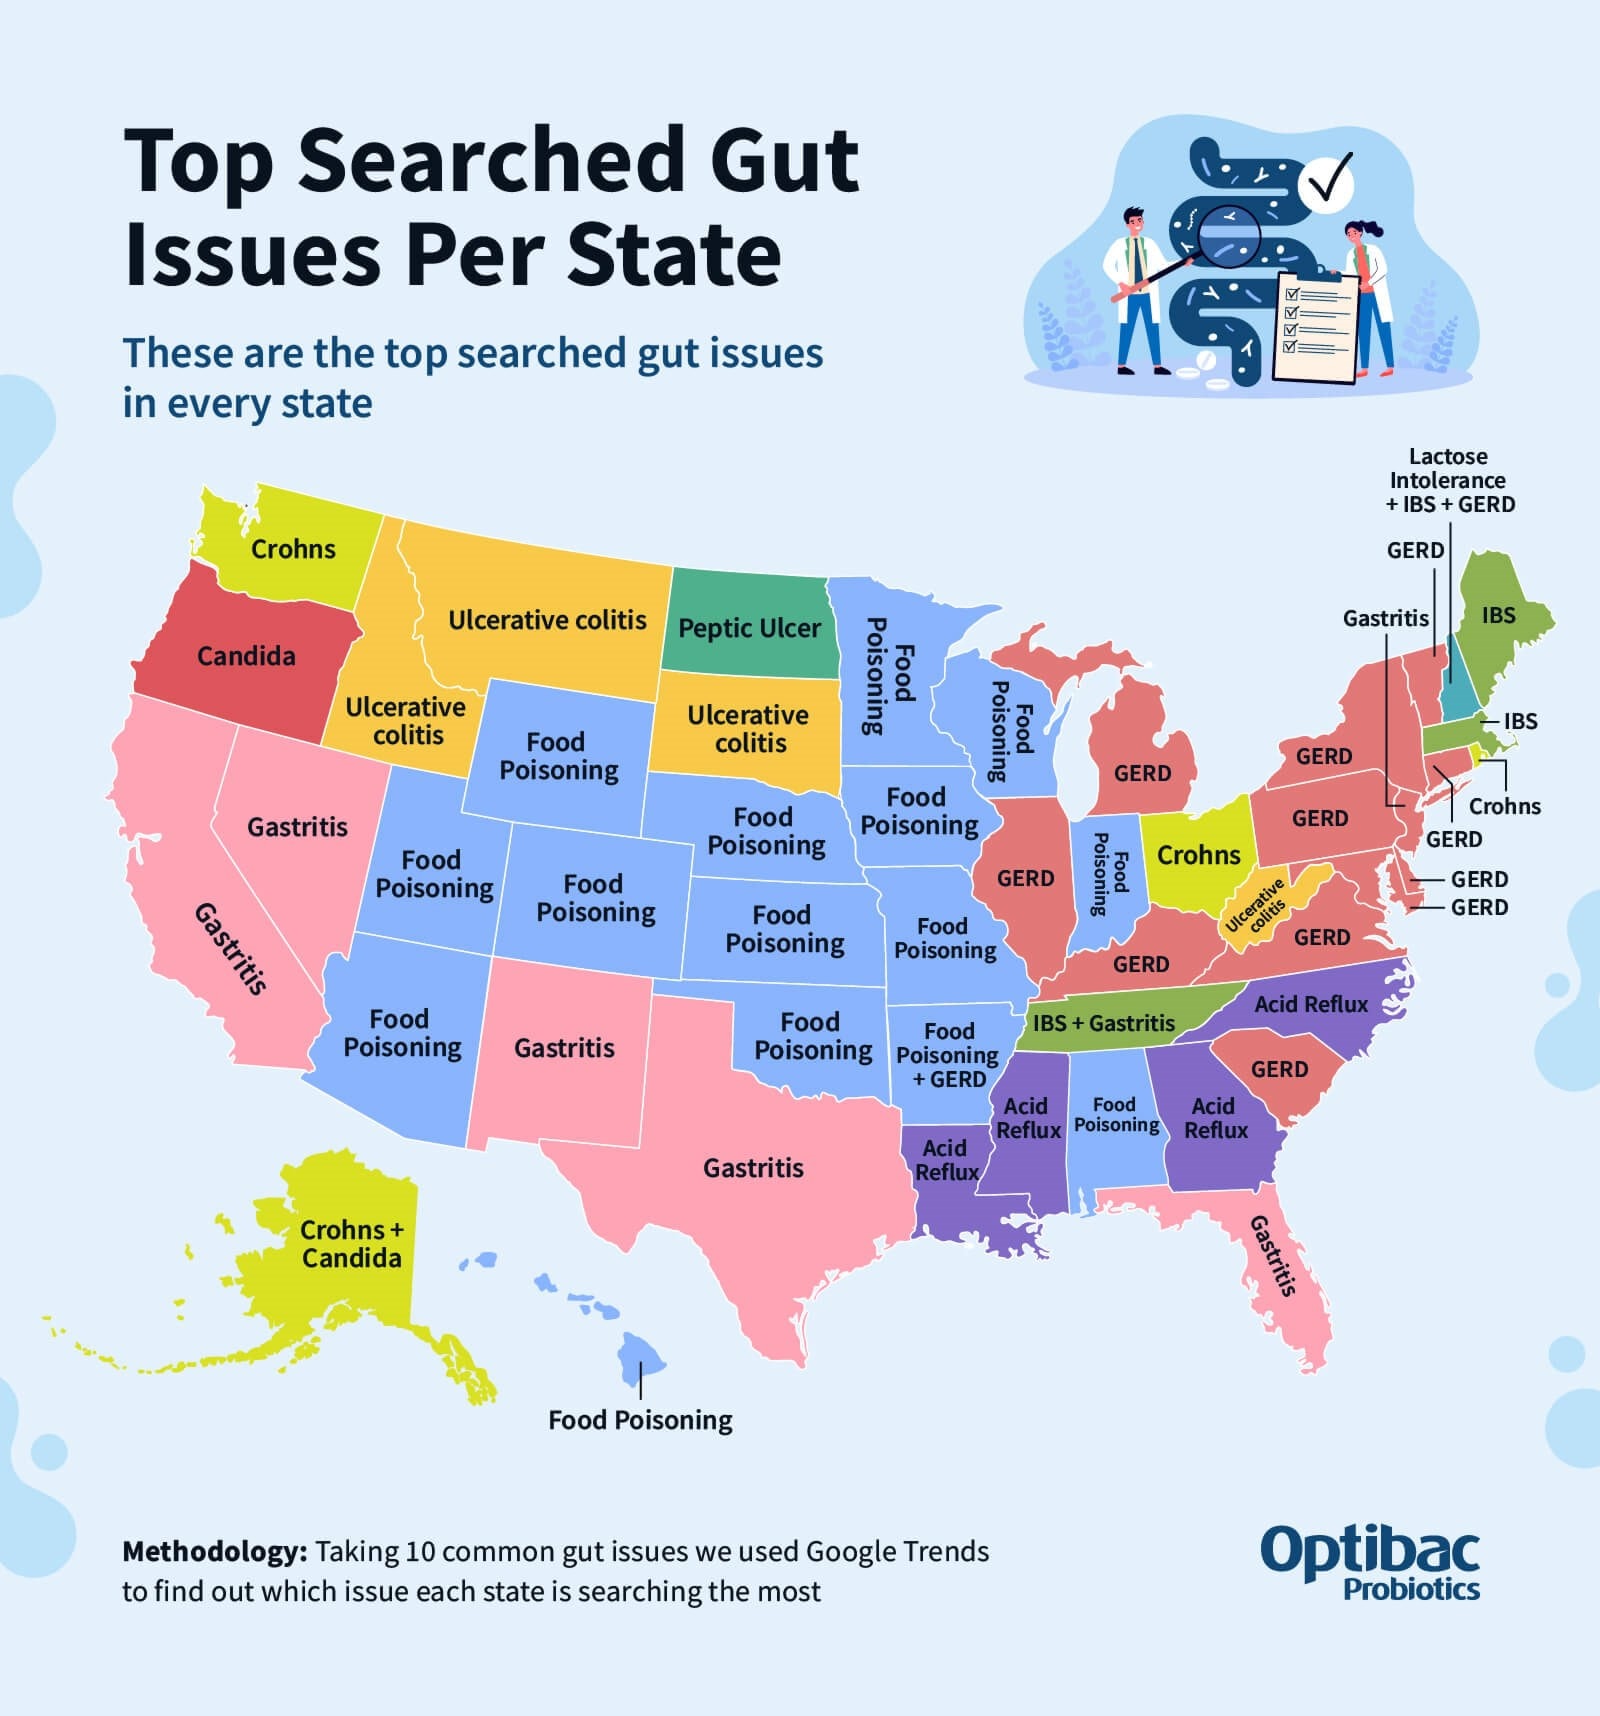 gut issues per state #1